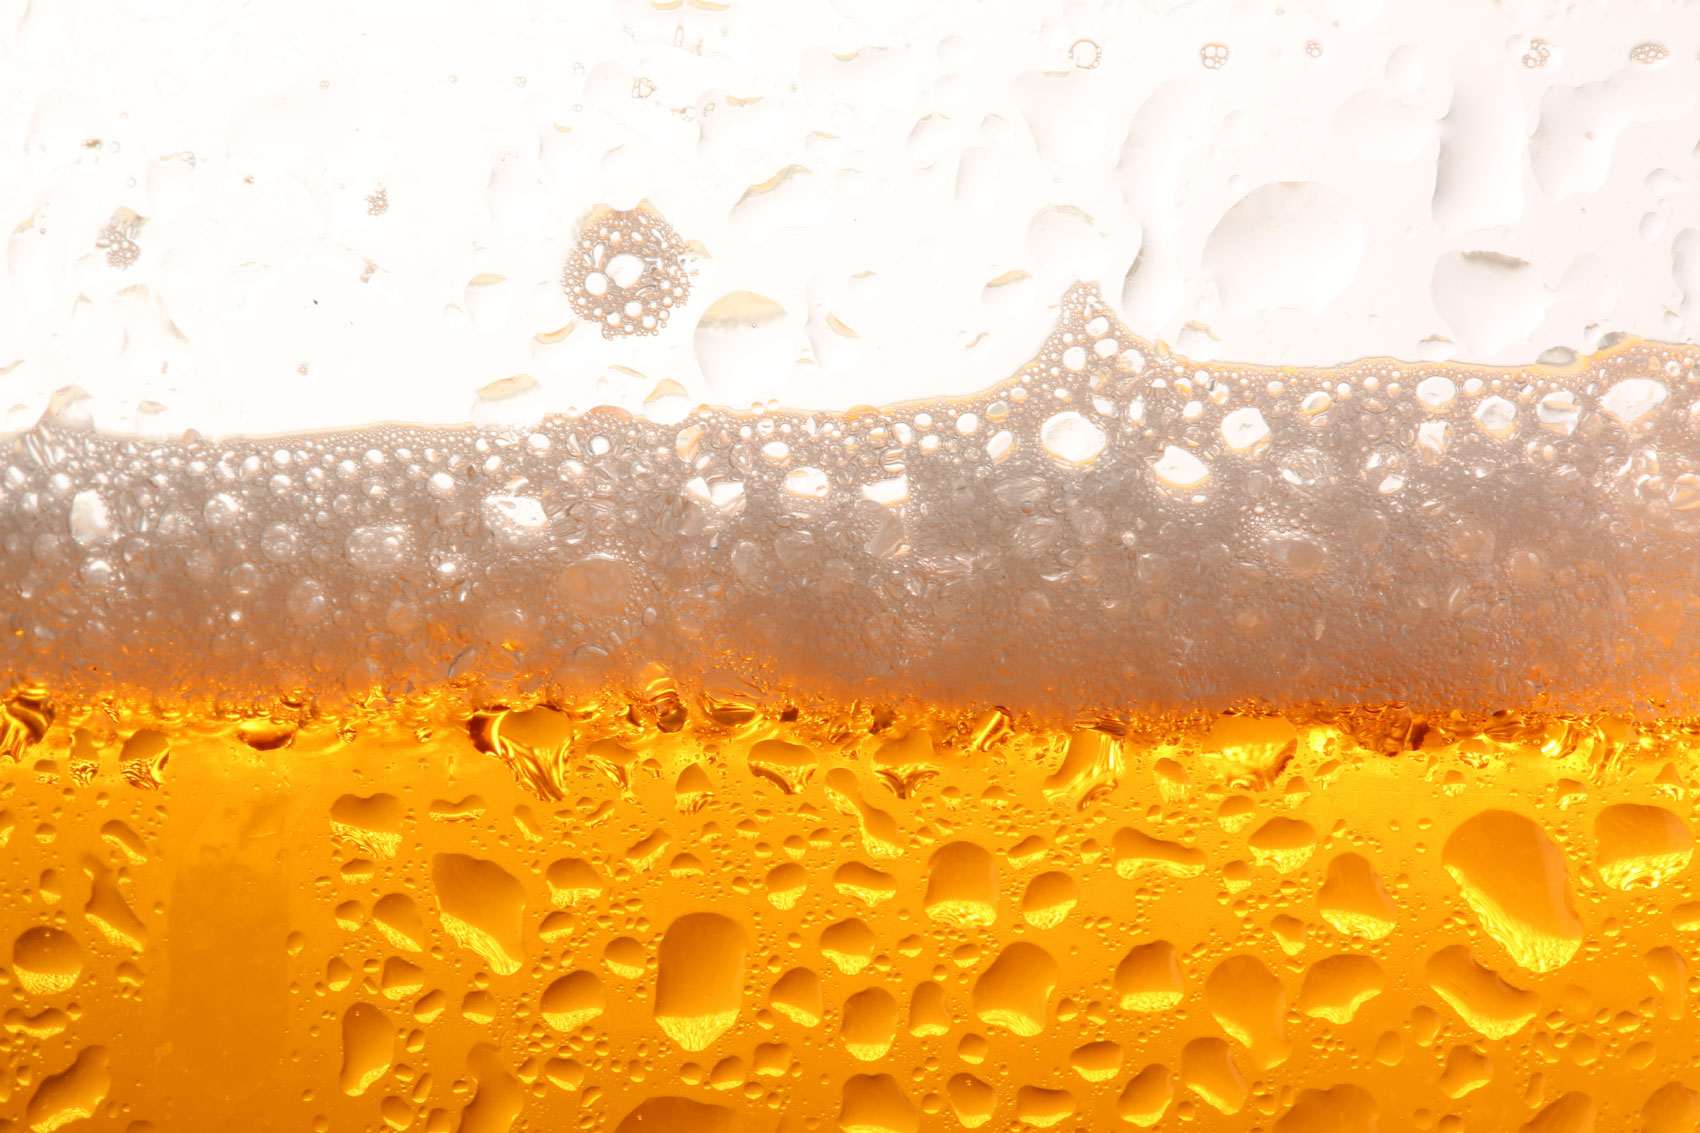 Extreme closeup of a bubbly beer with foam